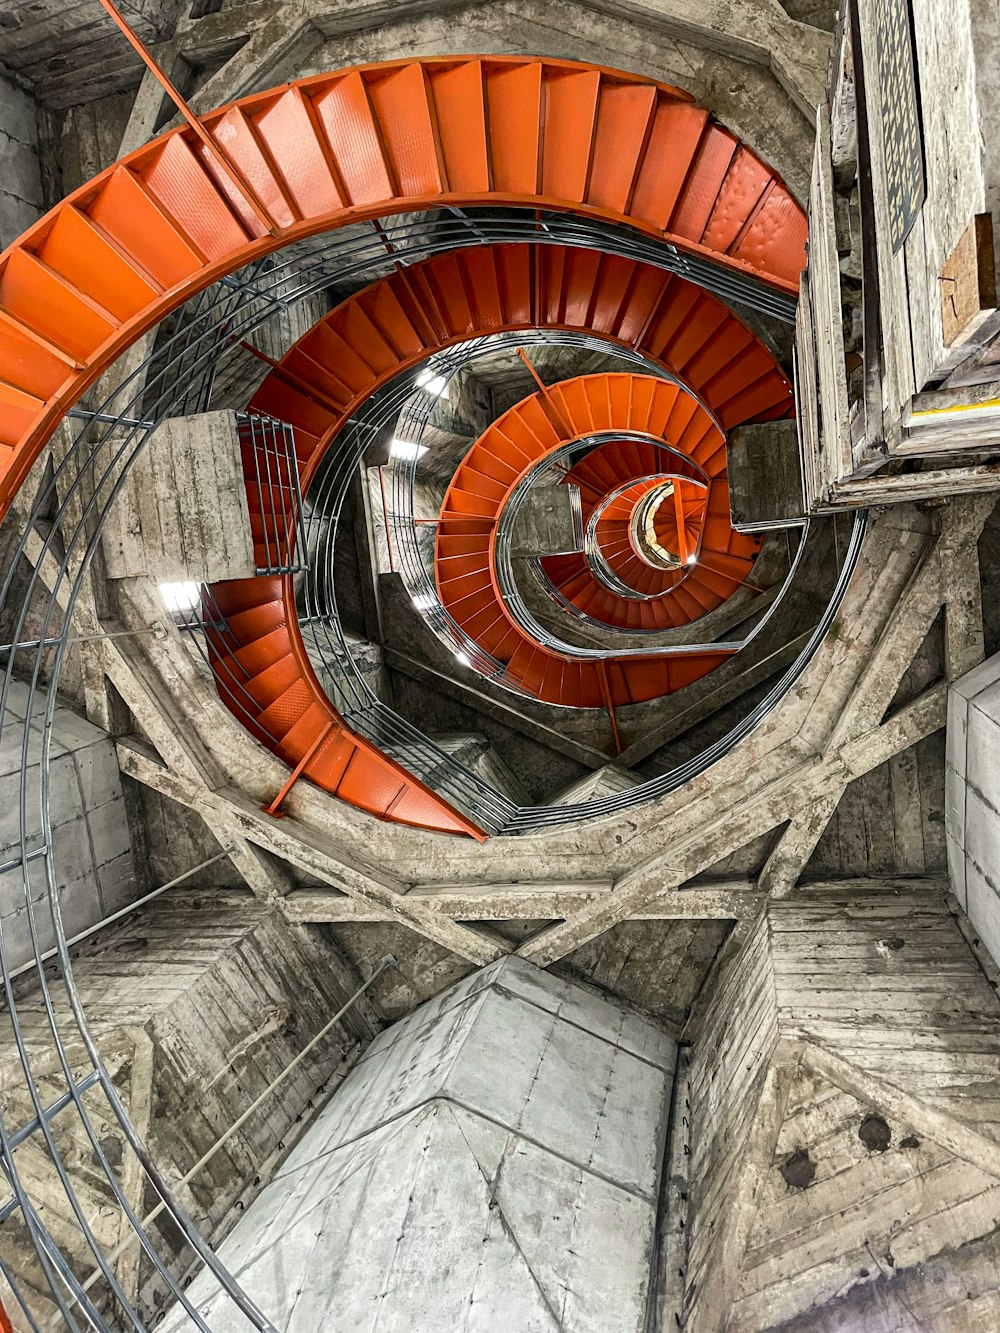 a spiral staircase in a building with orange railings